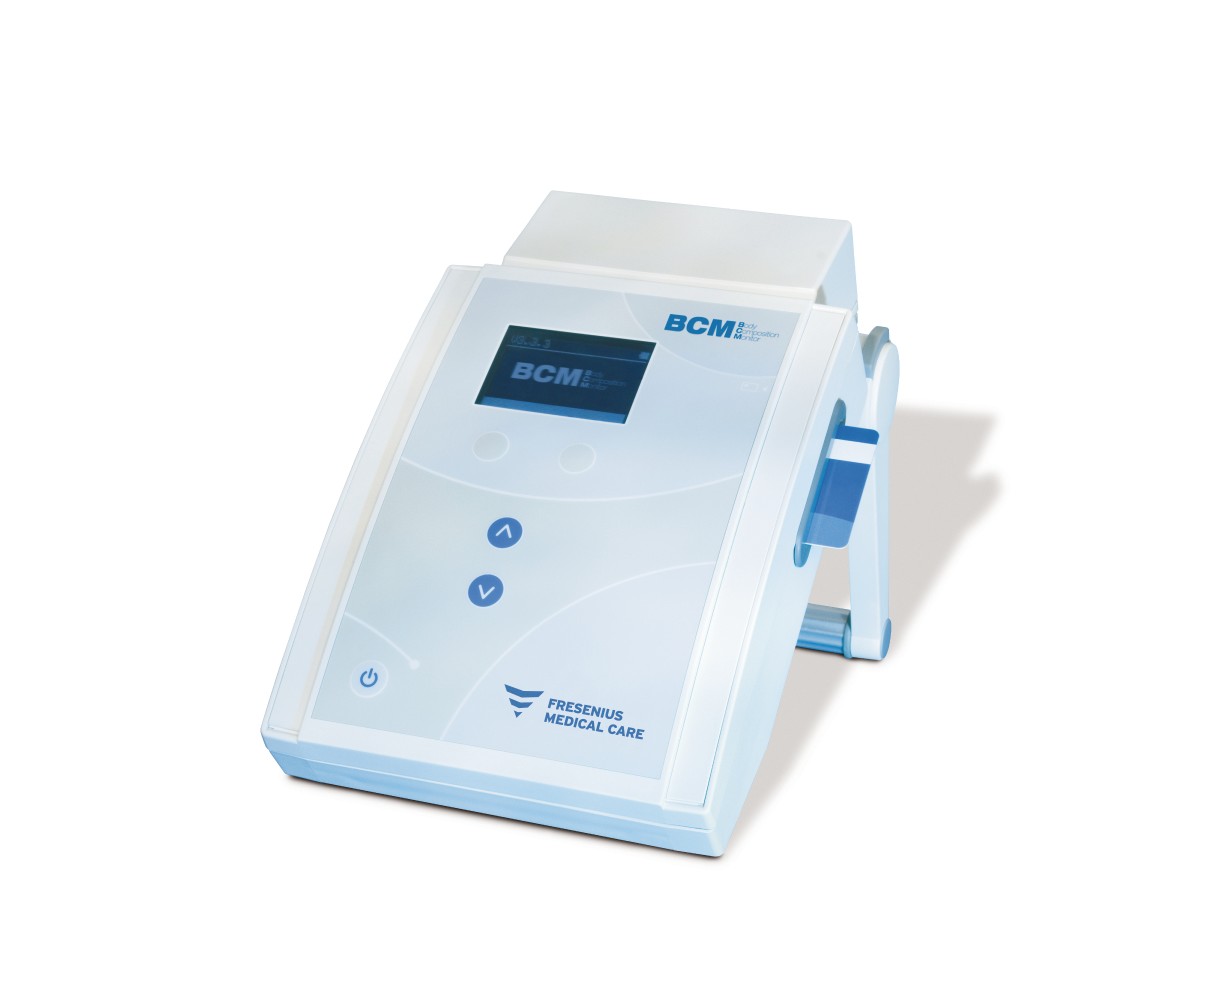 Body Composition Monitor BCM